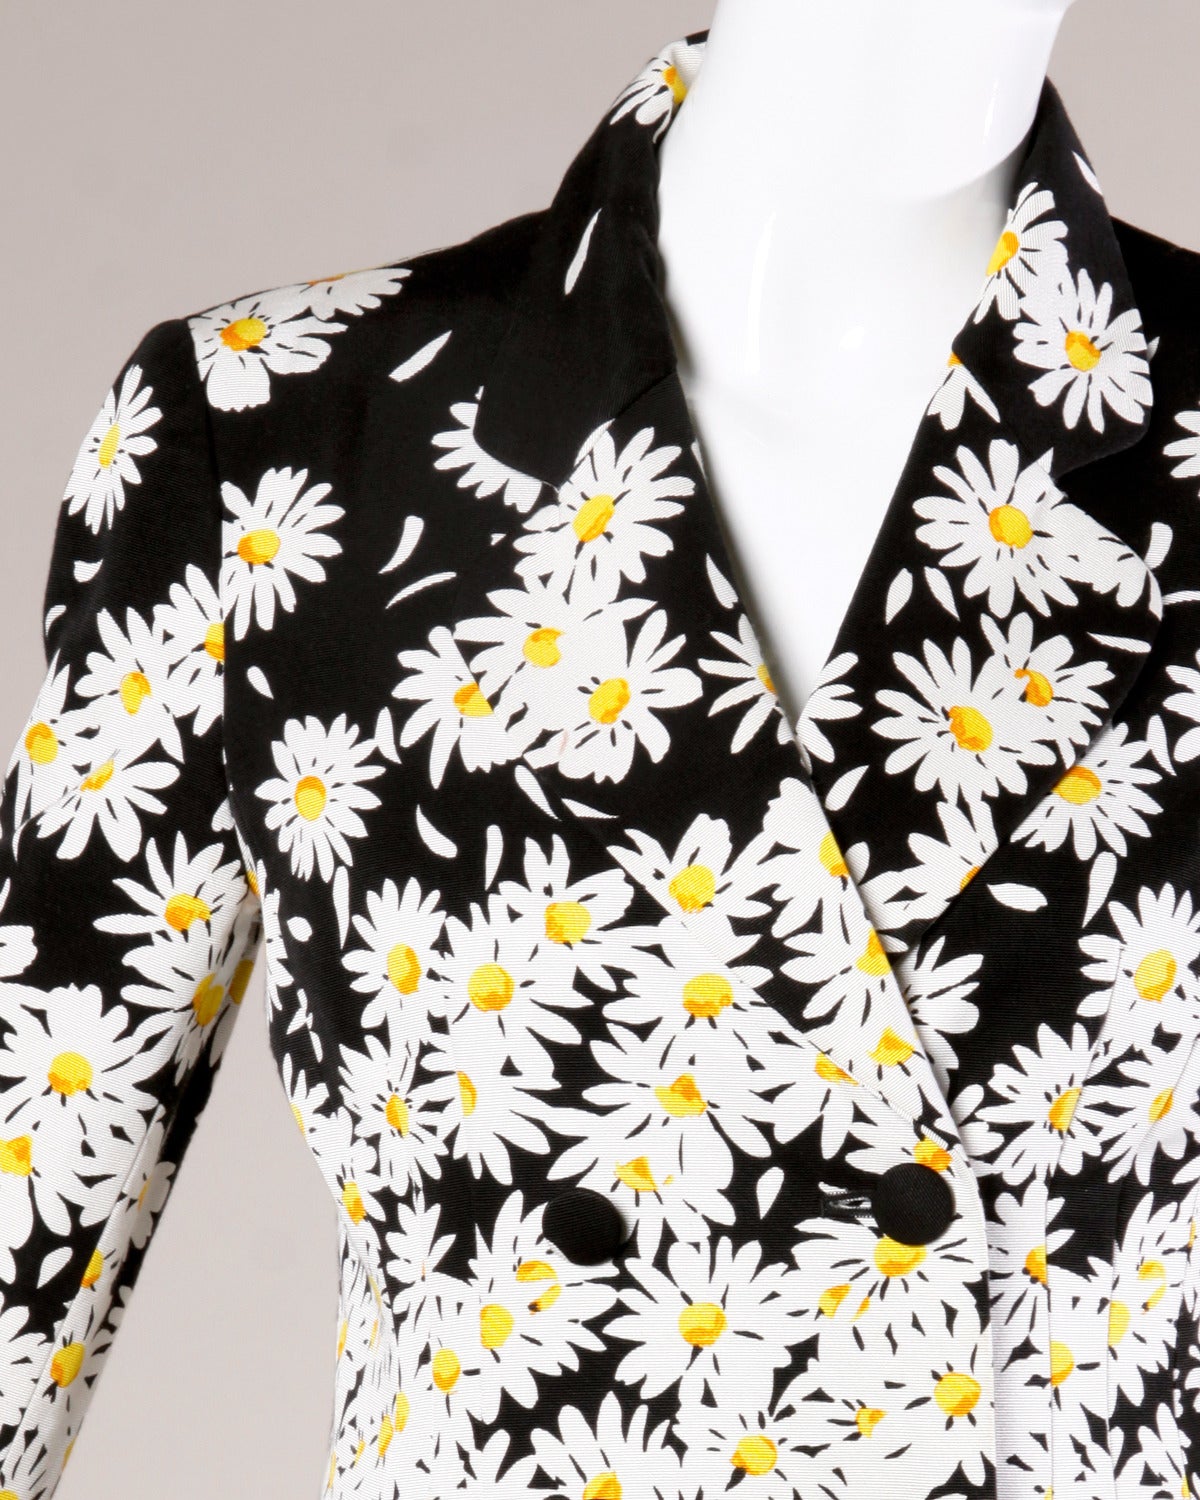 Vintage 1990s Moschino blazer jacket with a daisy design.

Details:

Fully Lined
Structured Shoulder Pads Are Sewn Into Lining
Front Button Closure
Marked Size: I 42/ US 8/ D 38/ F 38/ GB 10
Color: Black/ White/ Orange/ Yellow
Fabric: 66%